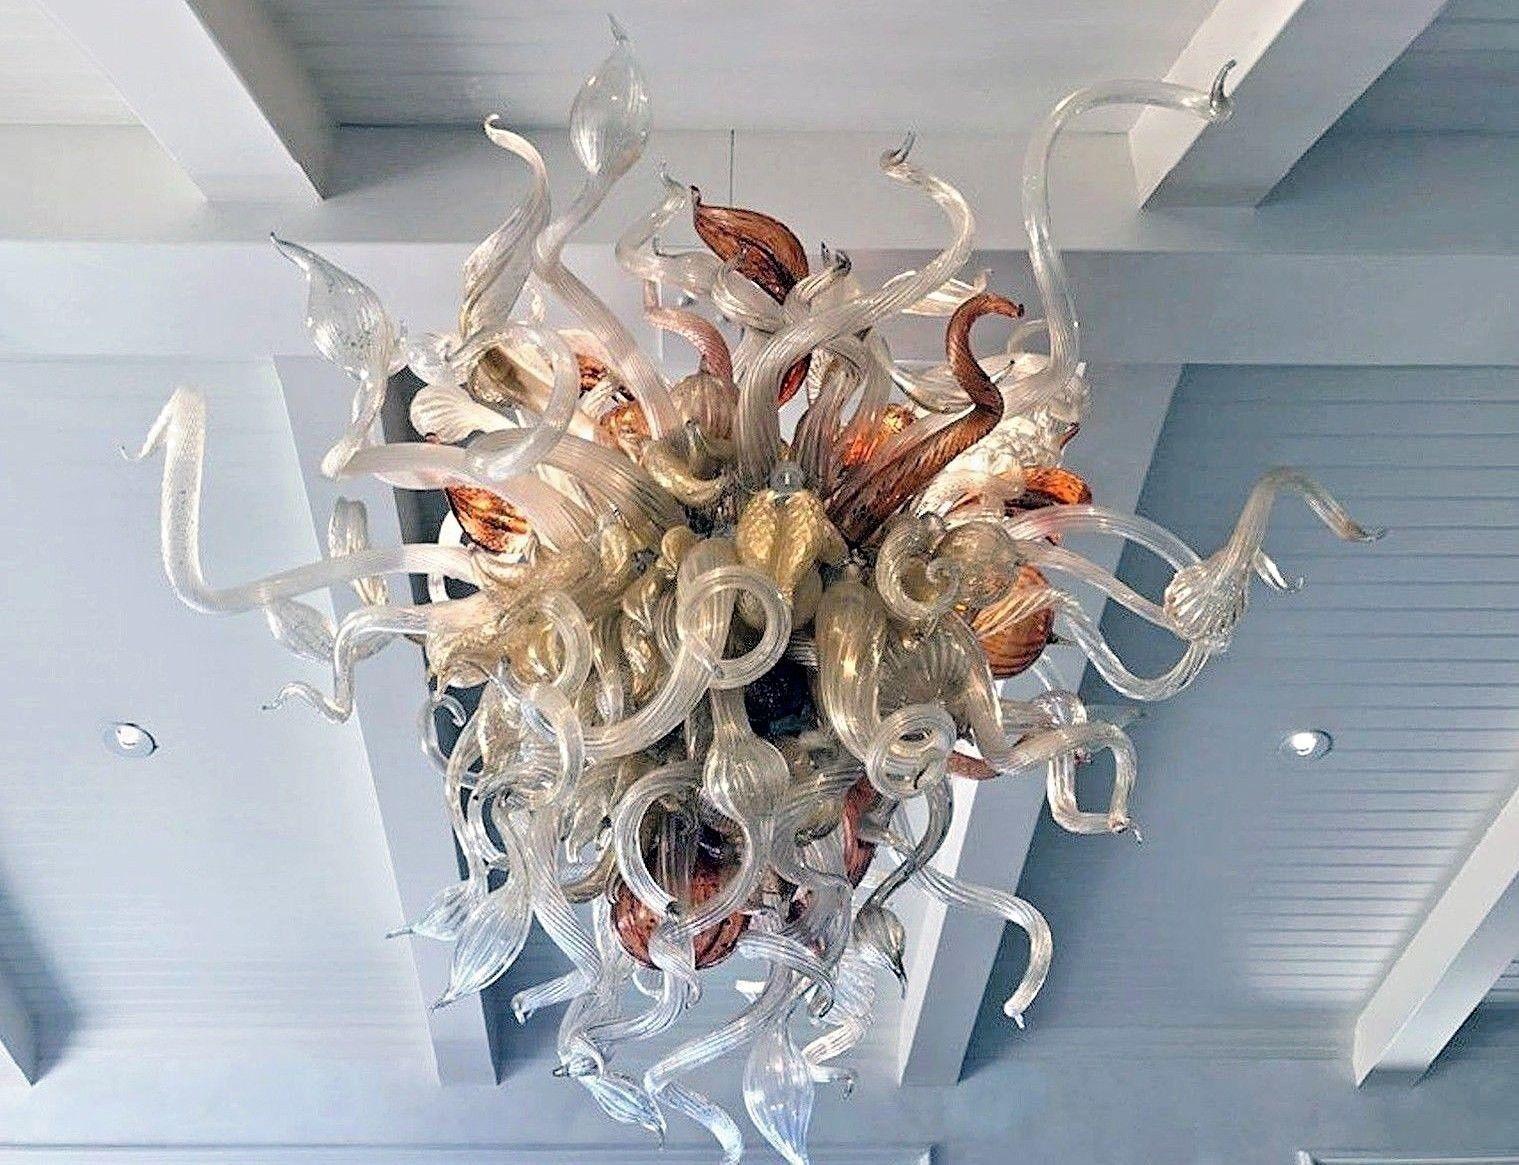 Chihuly Chandelier 5' x 4', 250 pieces includes professional install worldwide - Brown Abstract Sculpture by Dale Chihuly